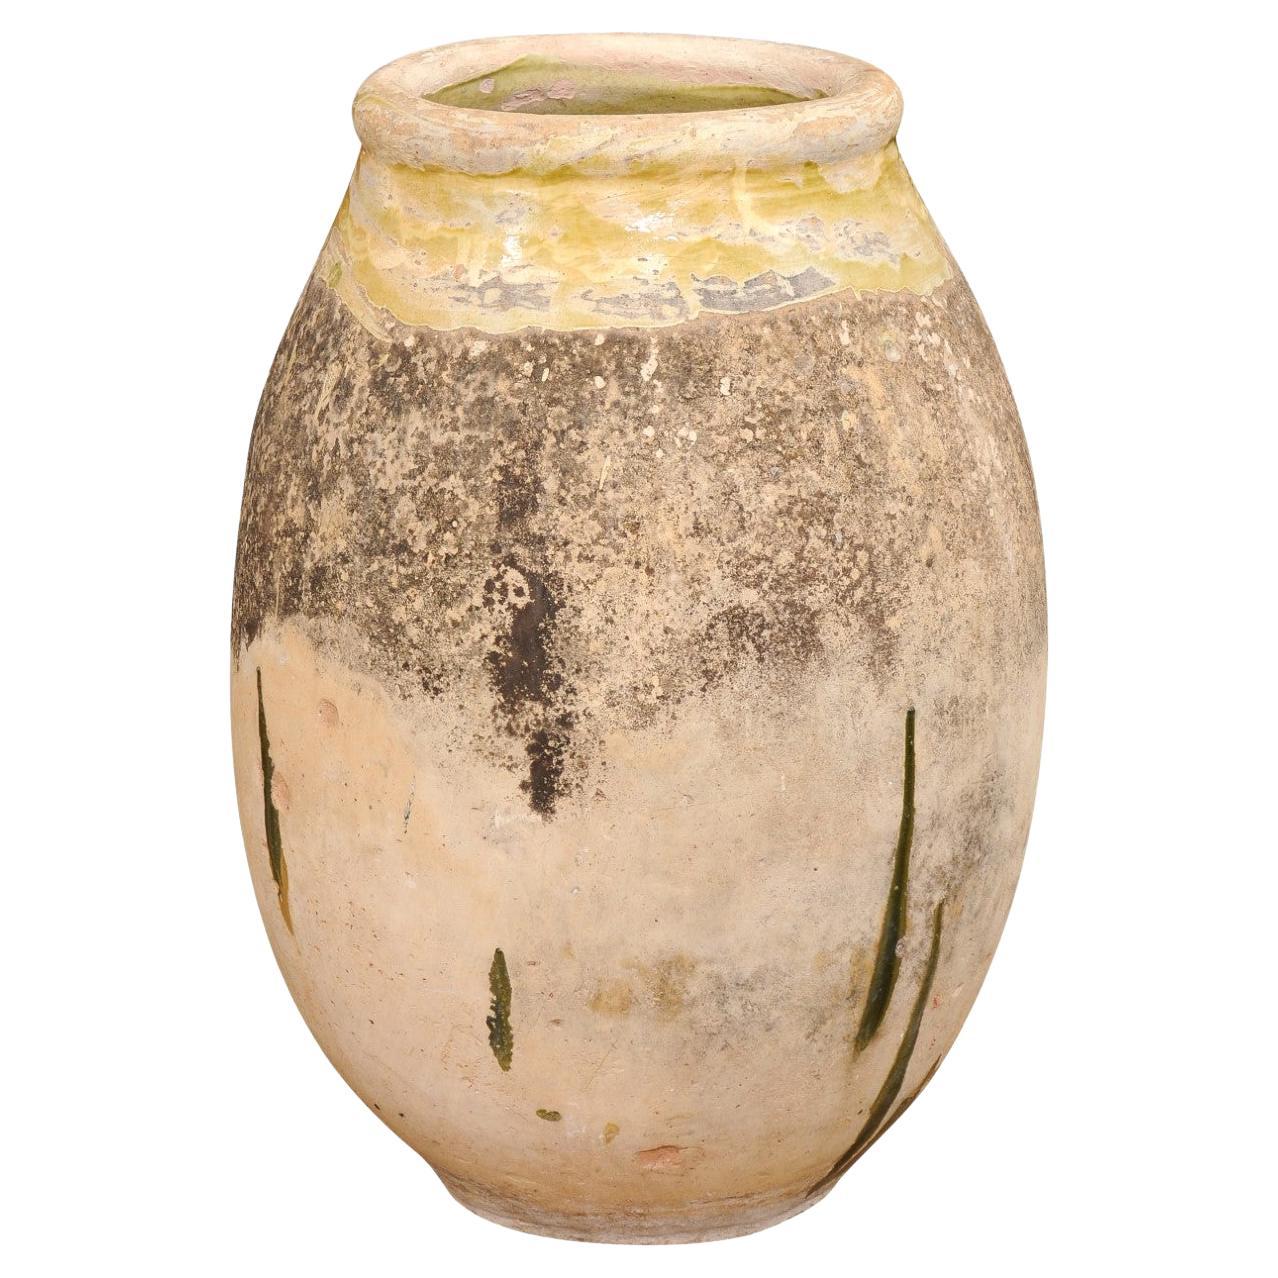 French 19th Century Terracotta Biot Jar with Yellow Glaze and Rustic Character